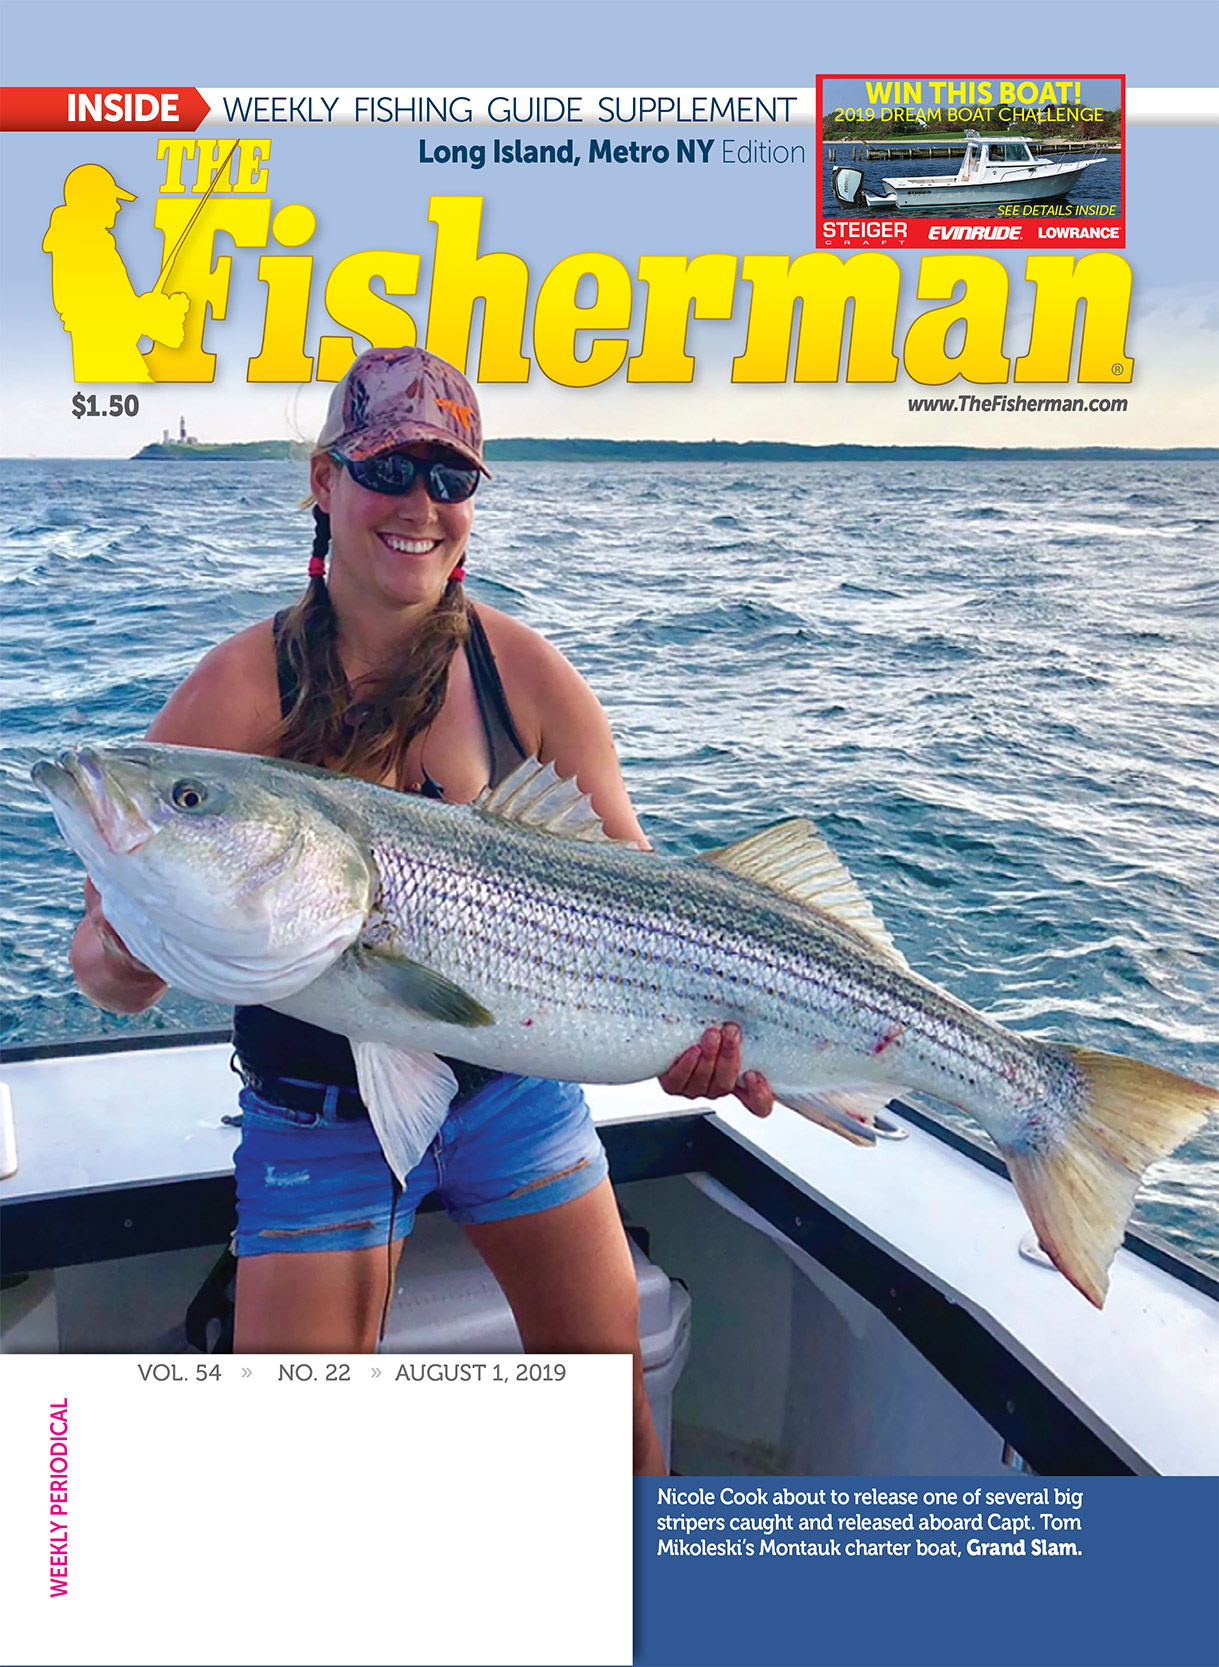 https://www.thefisherman.com/wp-content/uploads/2019/08/2019-8-LIF-Weekly-cover-issue-22.jpg